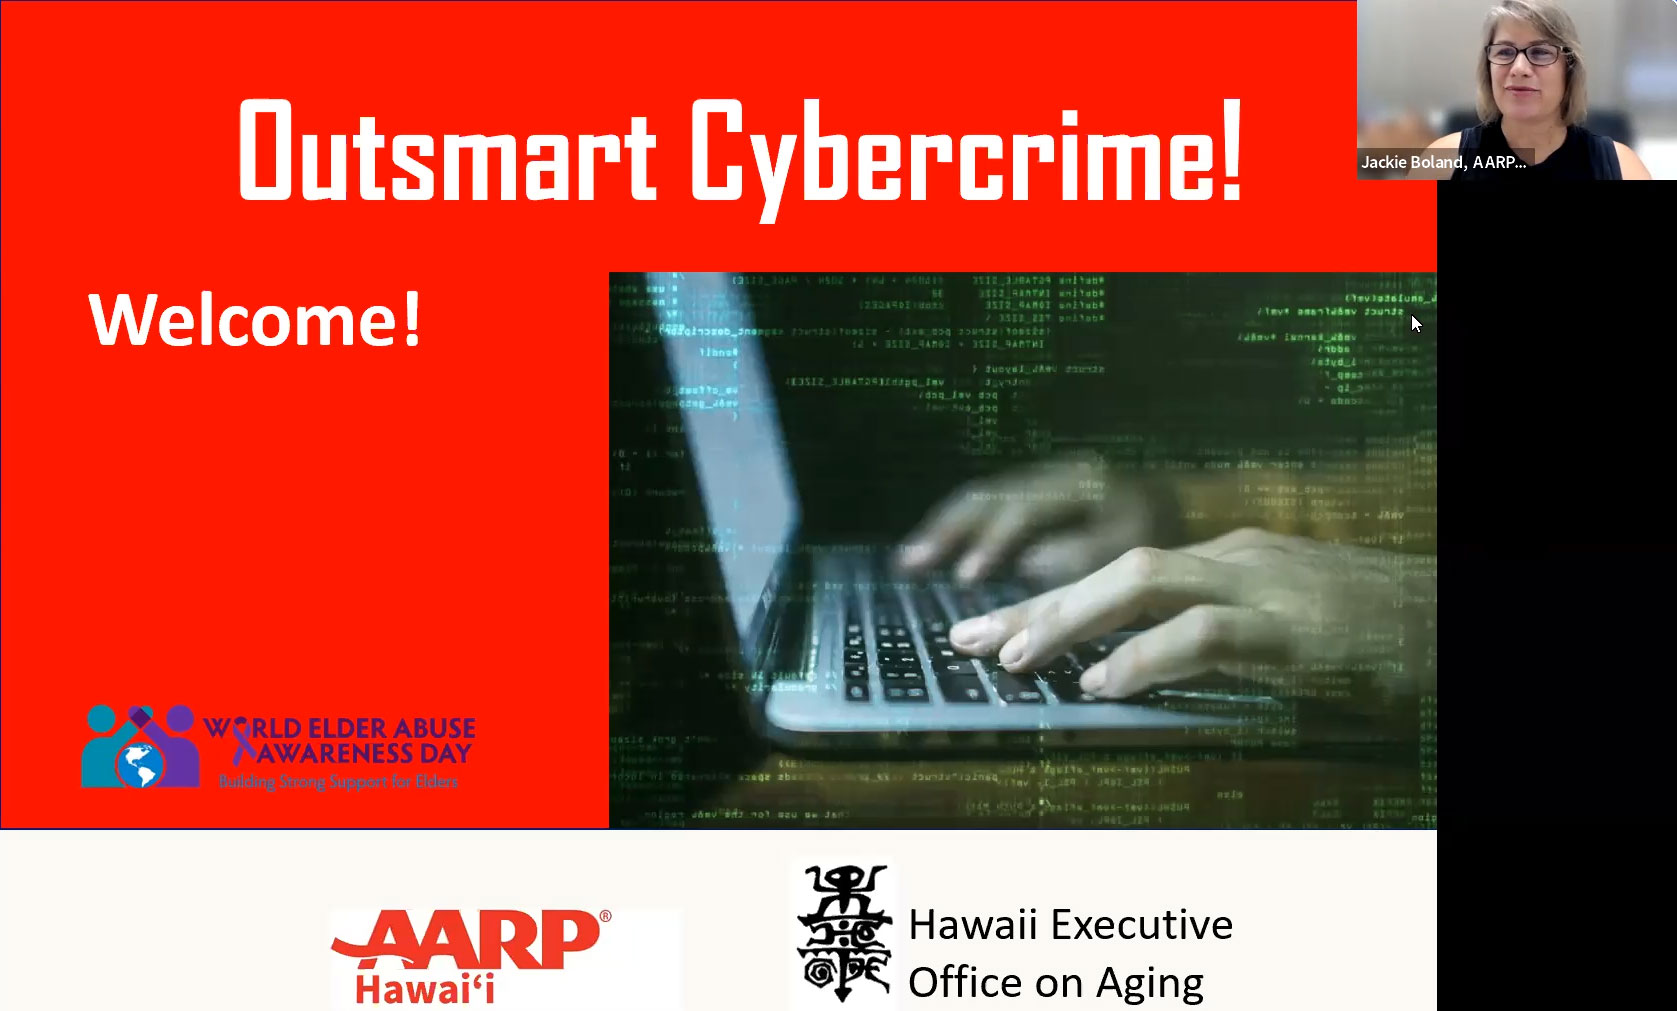 Outsmart Cybercrime